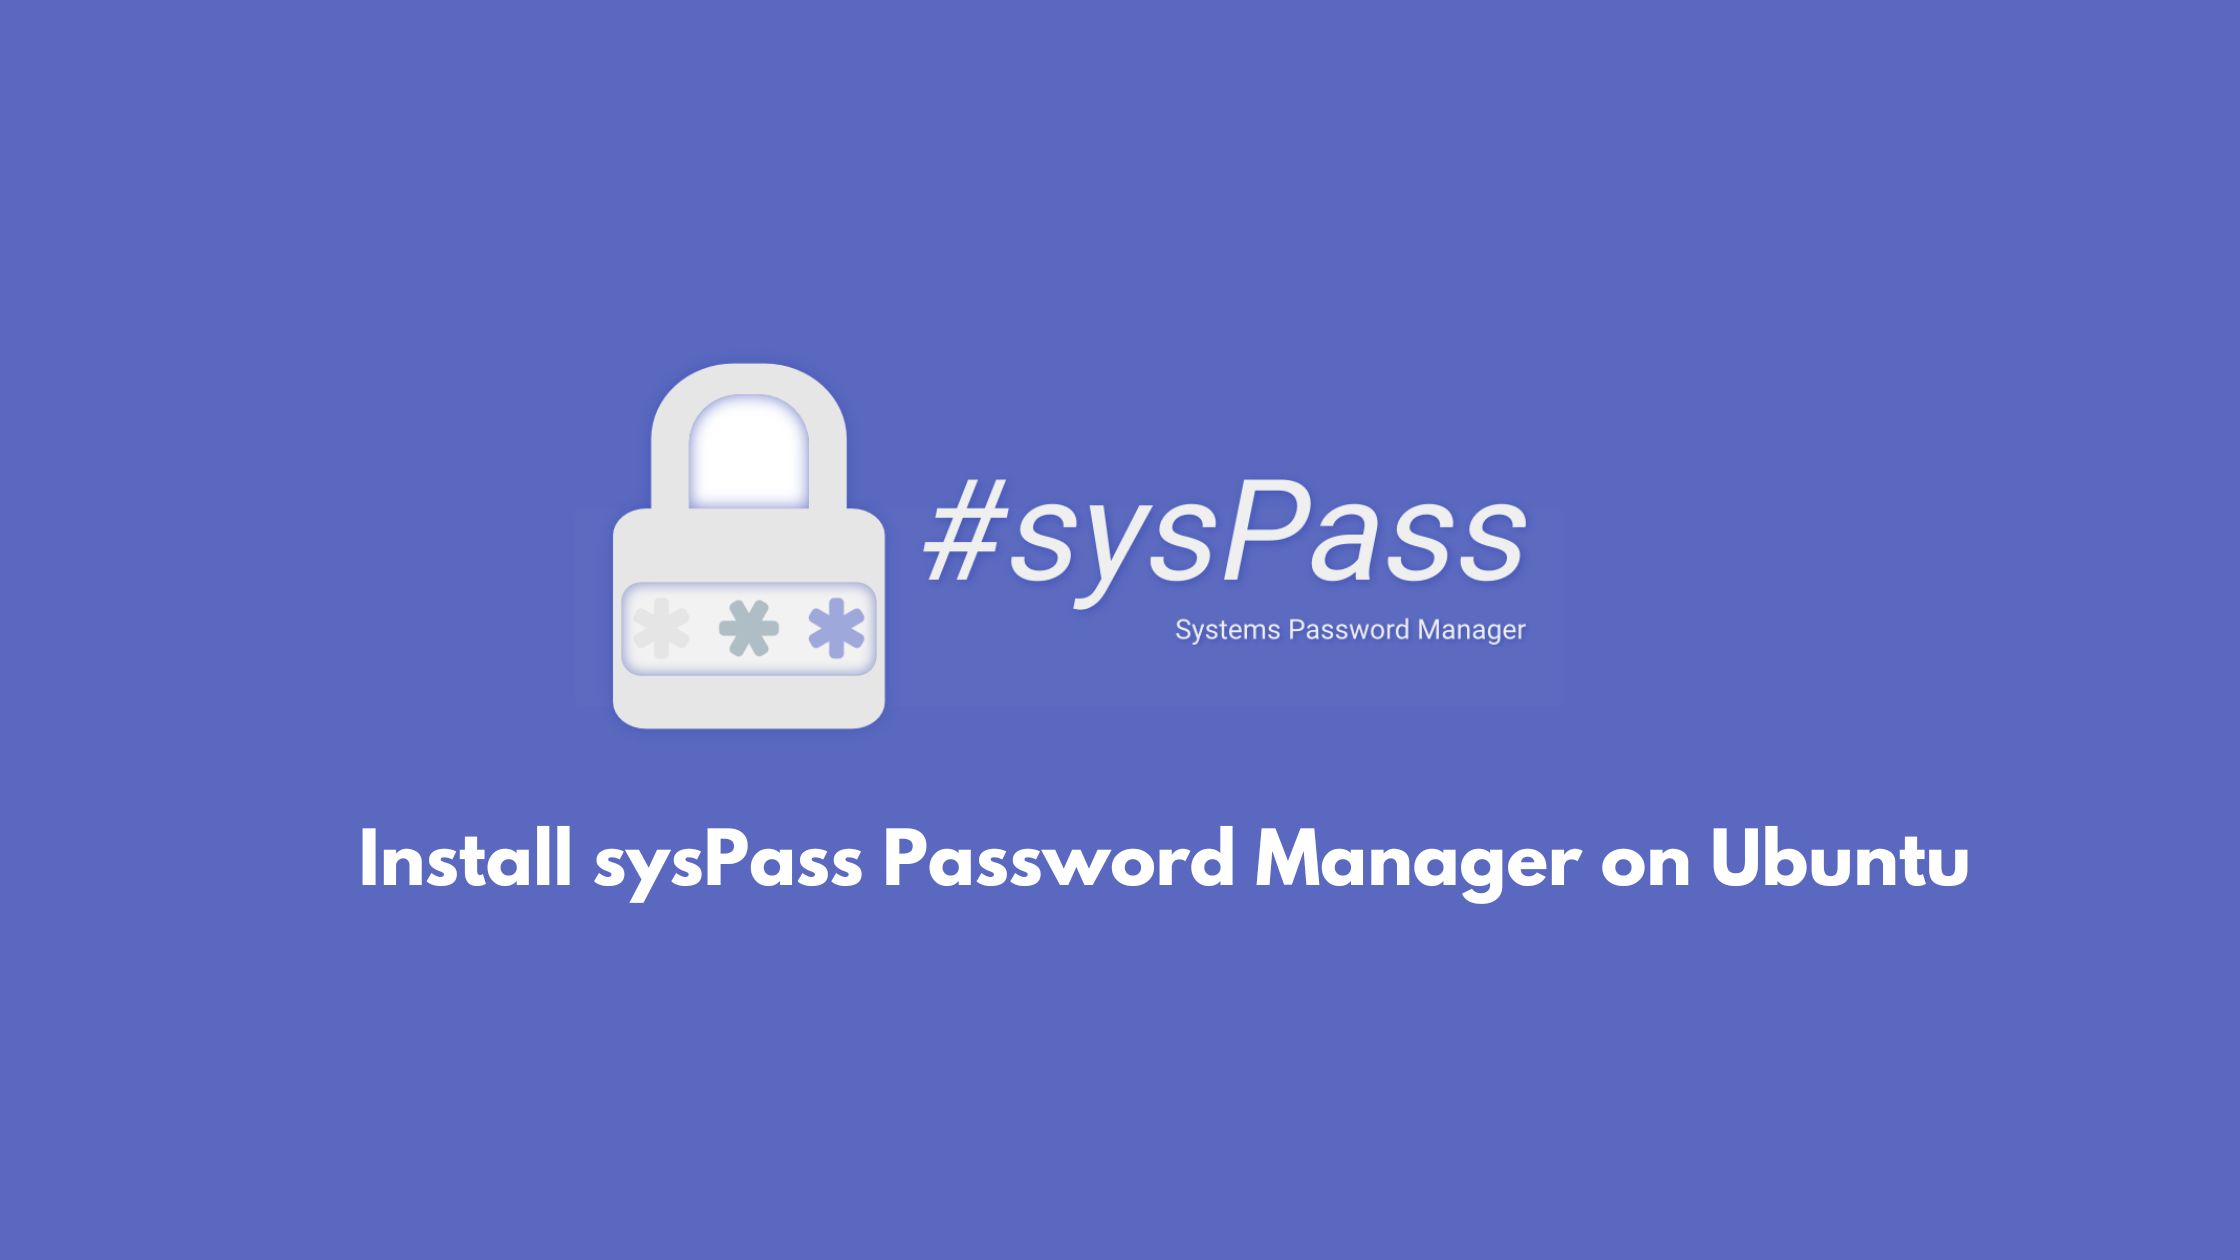 How to Install sysPass Password Manager on Ubuntu